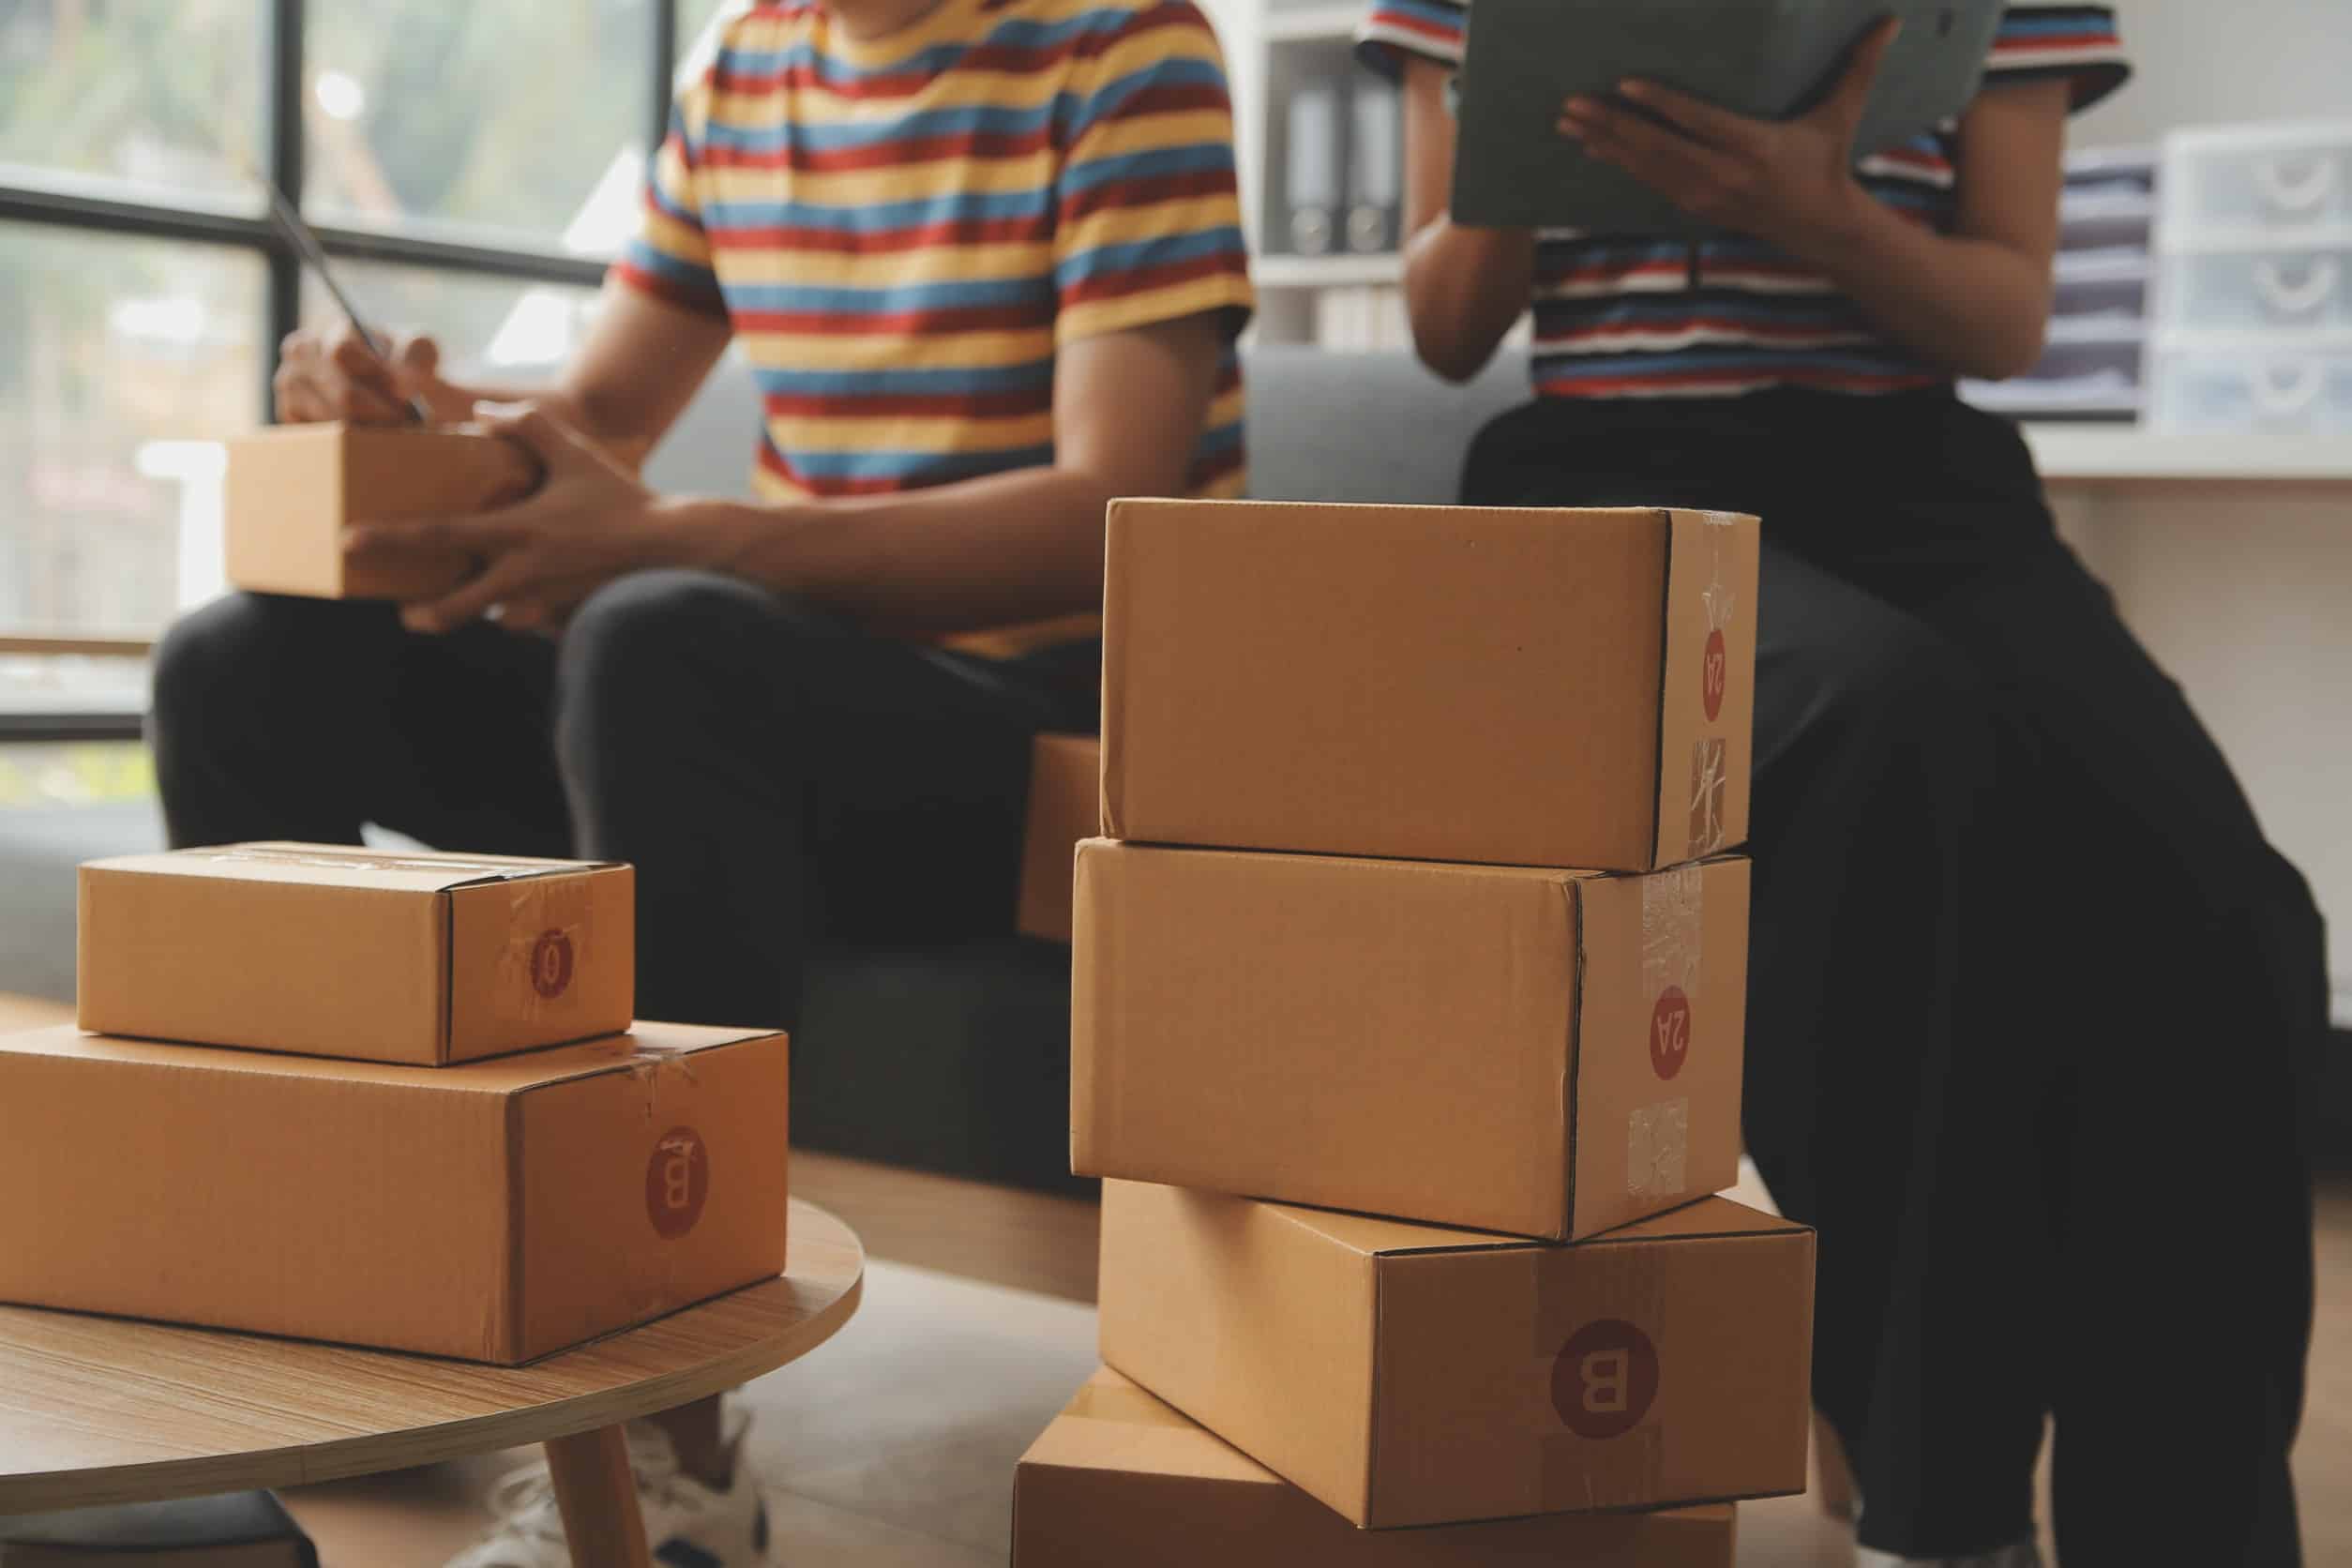 A stack of packaged boxes on a coffee table. In the background, two people sit on a couch looking at phones and tablets.